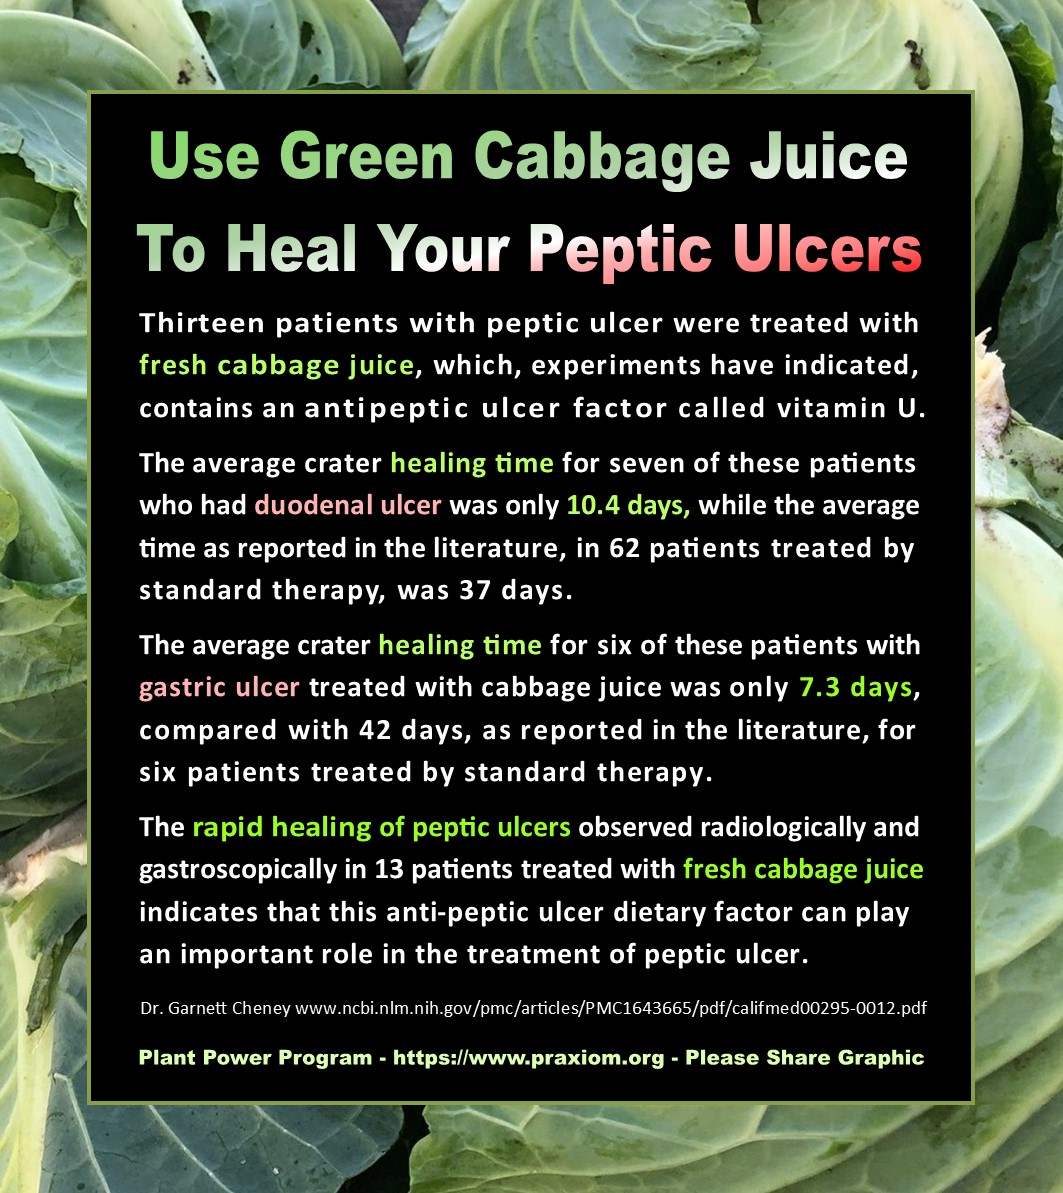 Use Green Cabbage Juice to Heal Peptic Ulcers - Dr. Garnett Cheney 